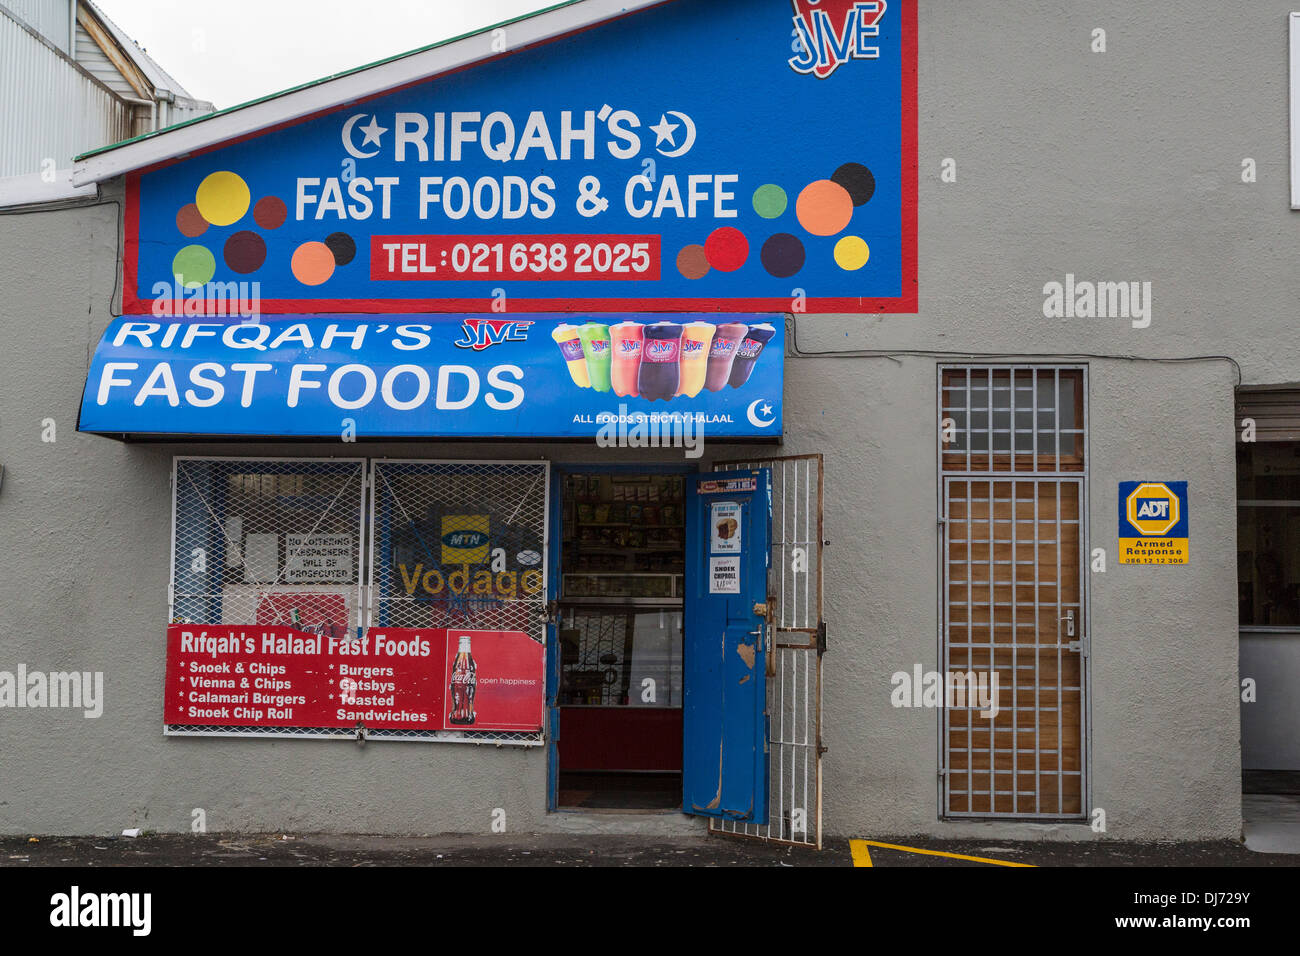 South Africa, Cape Town. Fast Food Store Offering Halaal (Islamic-approved) Food and Snacks. Note Metal Security Gates. Stock Photo